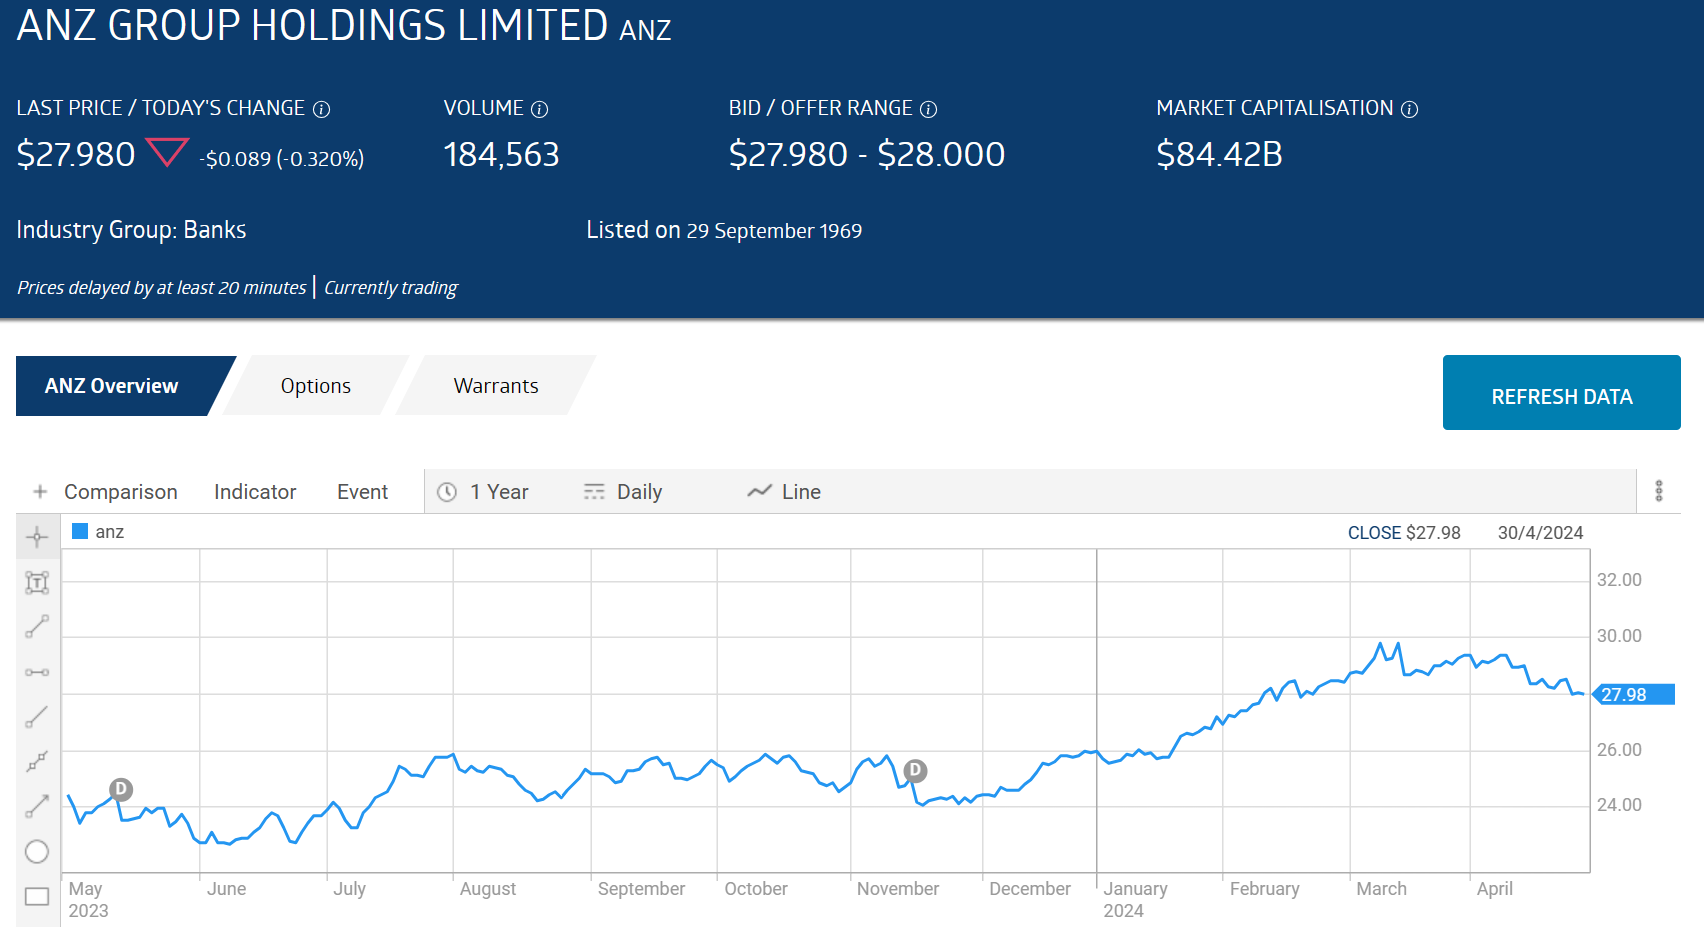 anz group holdings limited stock price chart 2024